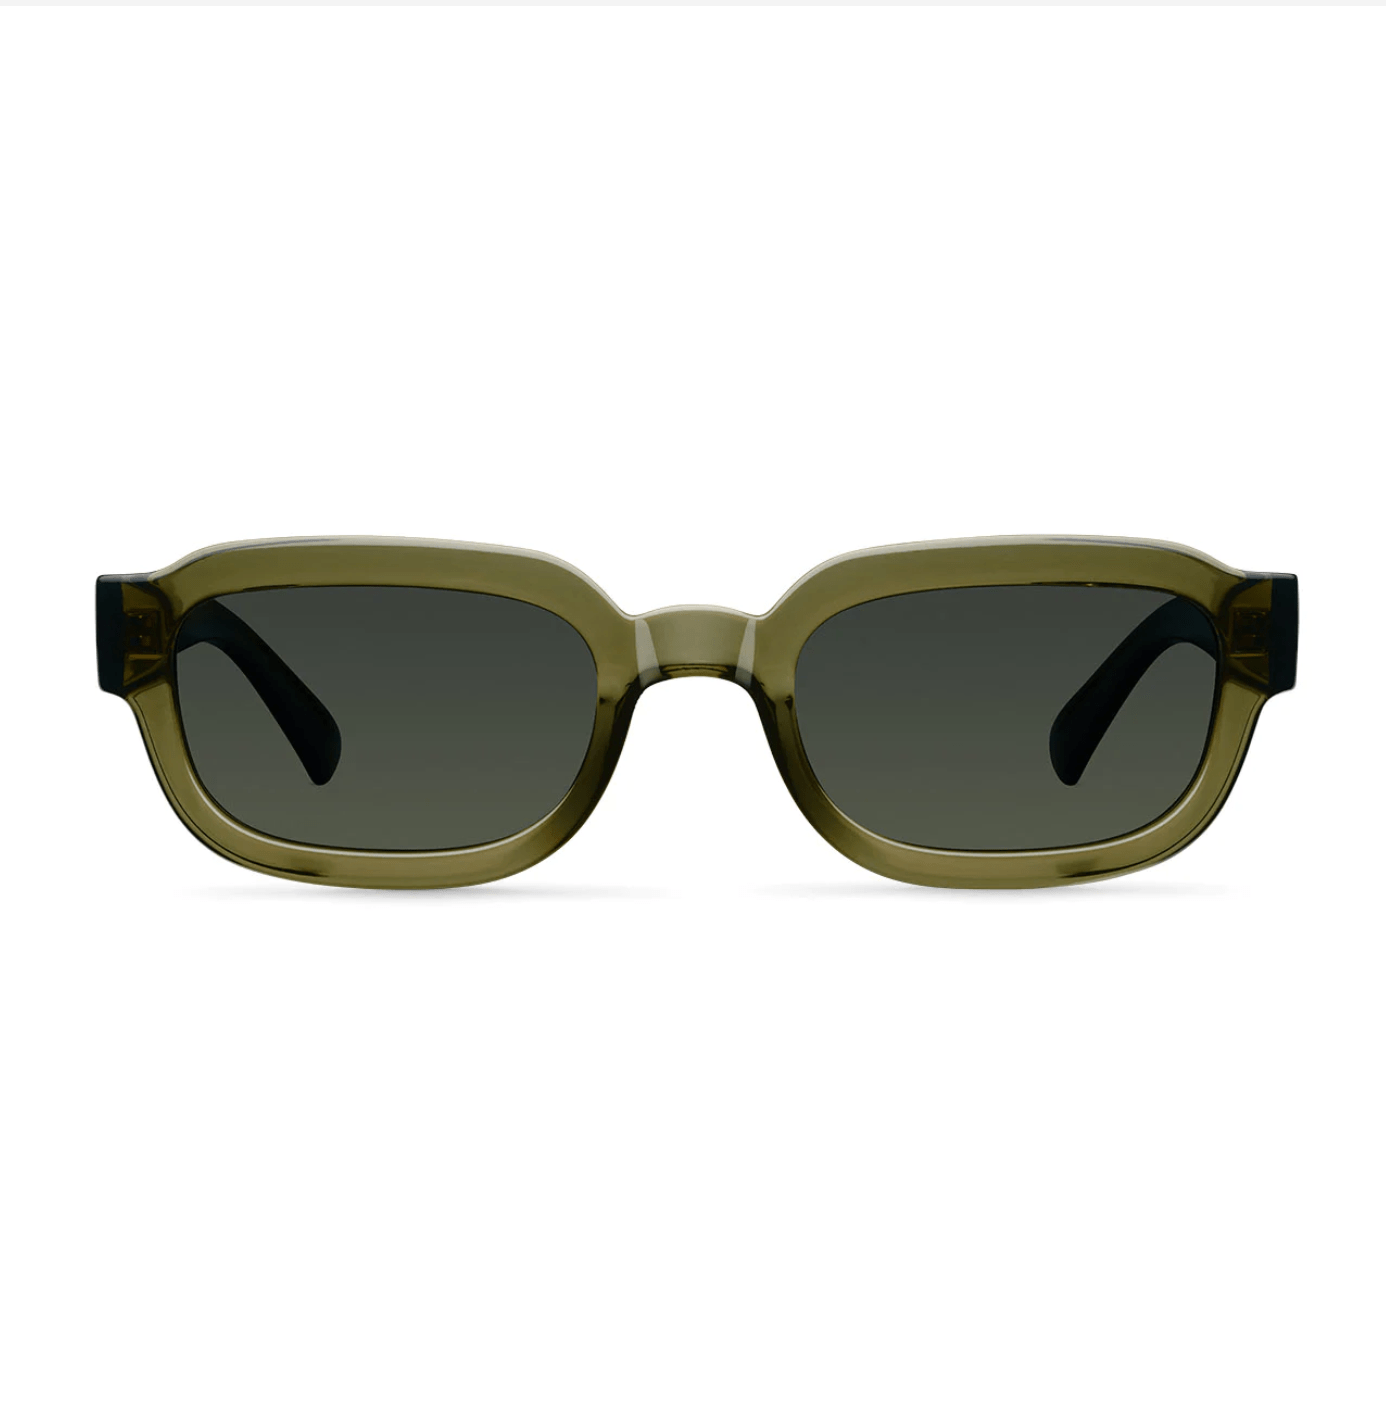 The Jamil green sunglasses design has soft angles, perfect for enhancing your features. ﻿These sunglasses will give an original twist to your look.